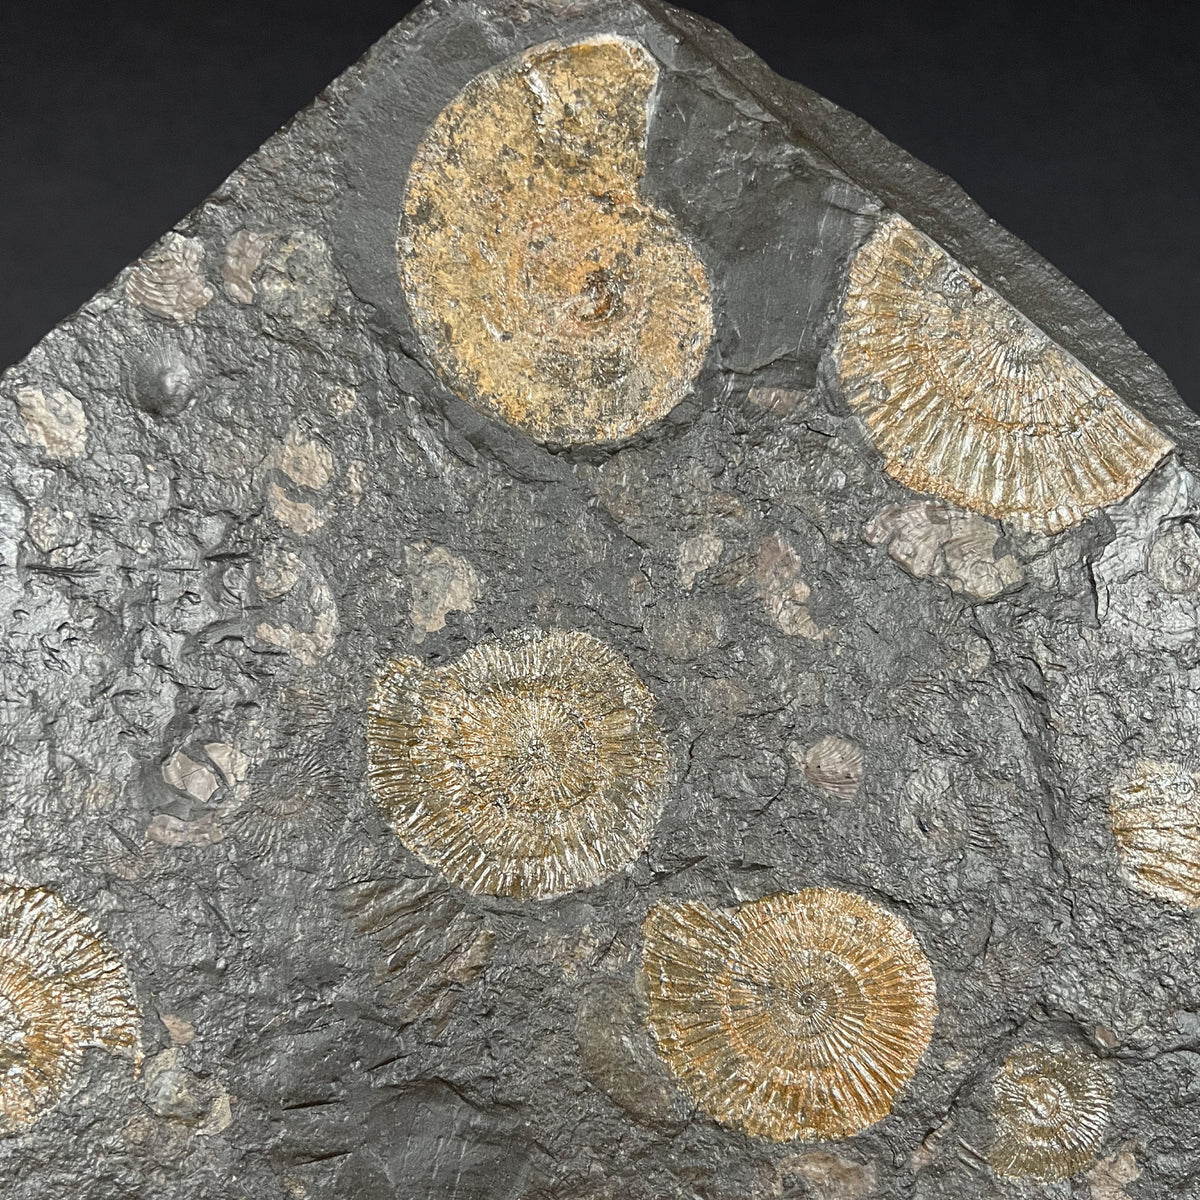 Harpoceras and Dactylioceras Pyrite Coated Ammonite Fossils